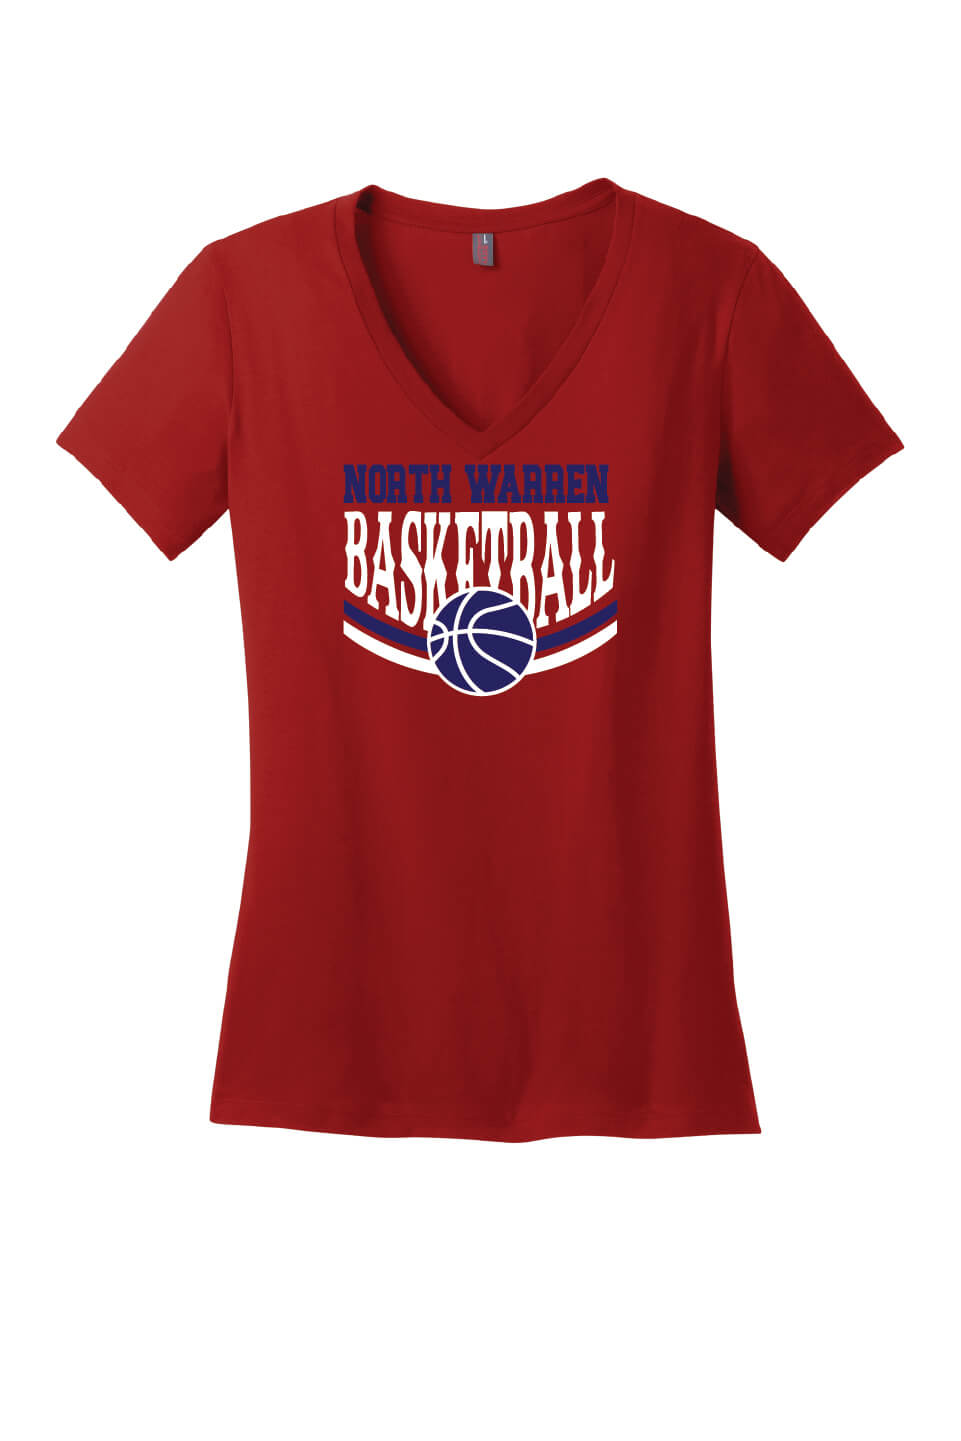 NW Basketball V-Neck Short Sleeve T-Shirt (Ladies) red